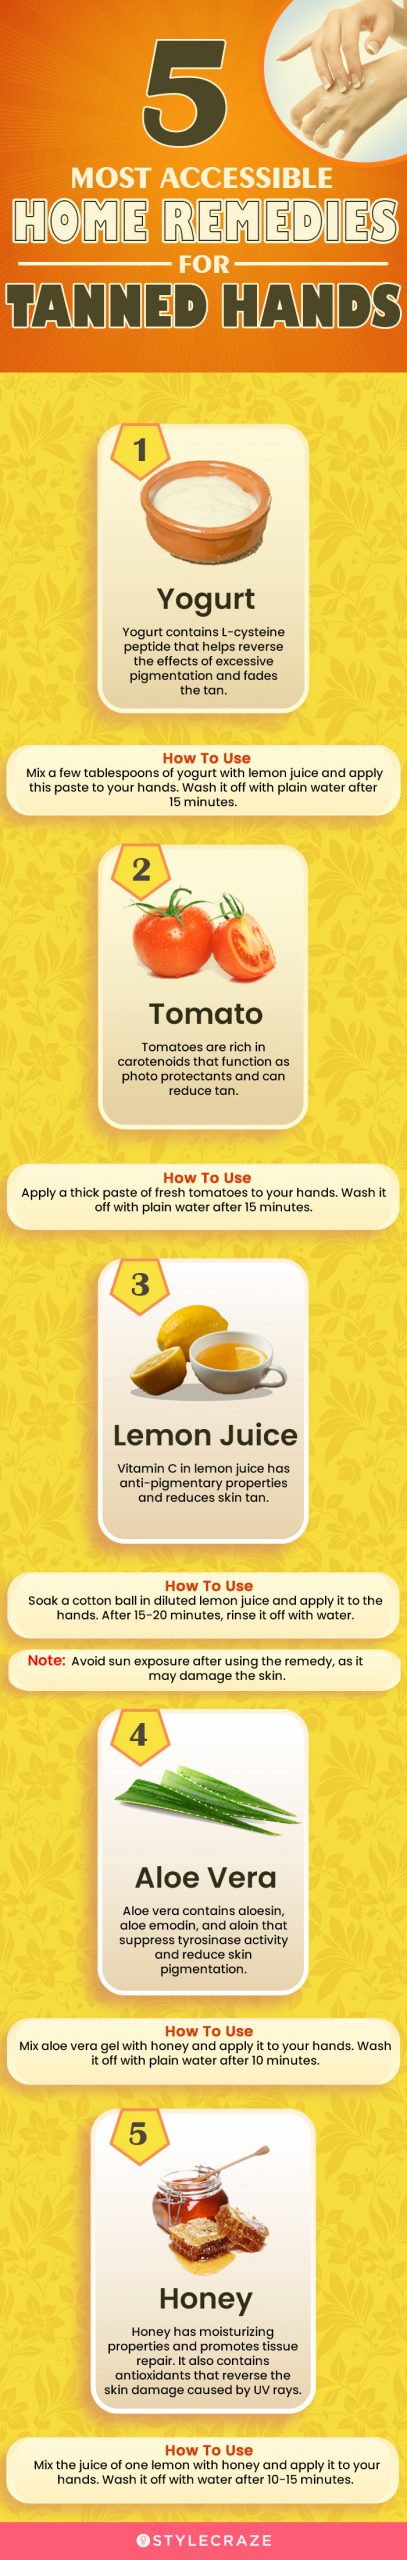 5 most accessible home remedies for tanned hands (infographic)